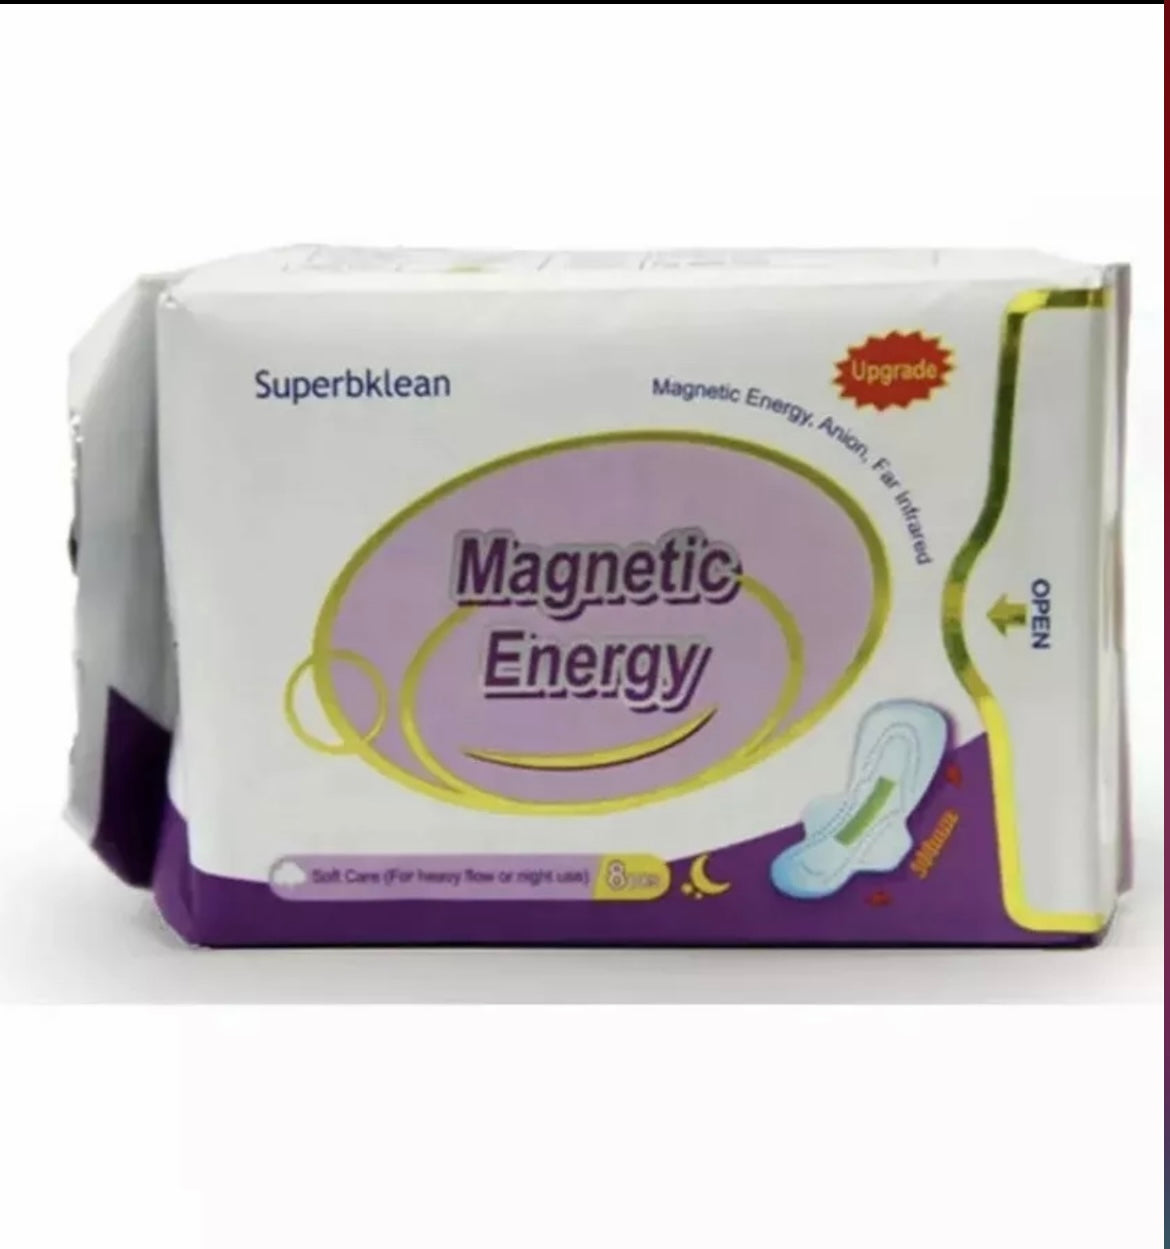 Longrich SuperbKlean Magnetic Sanitary Napkins/Pads/ Energy Panty Liners With Negative Ion/ Fights Infections/ Menstrual Cramps/Pains